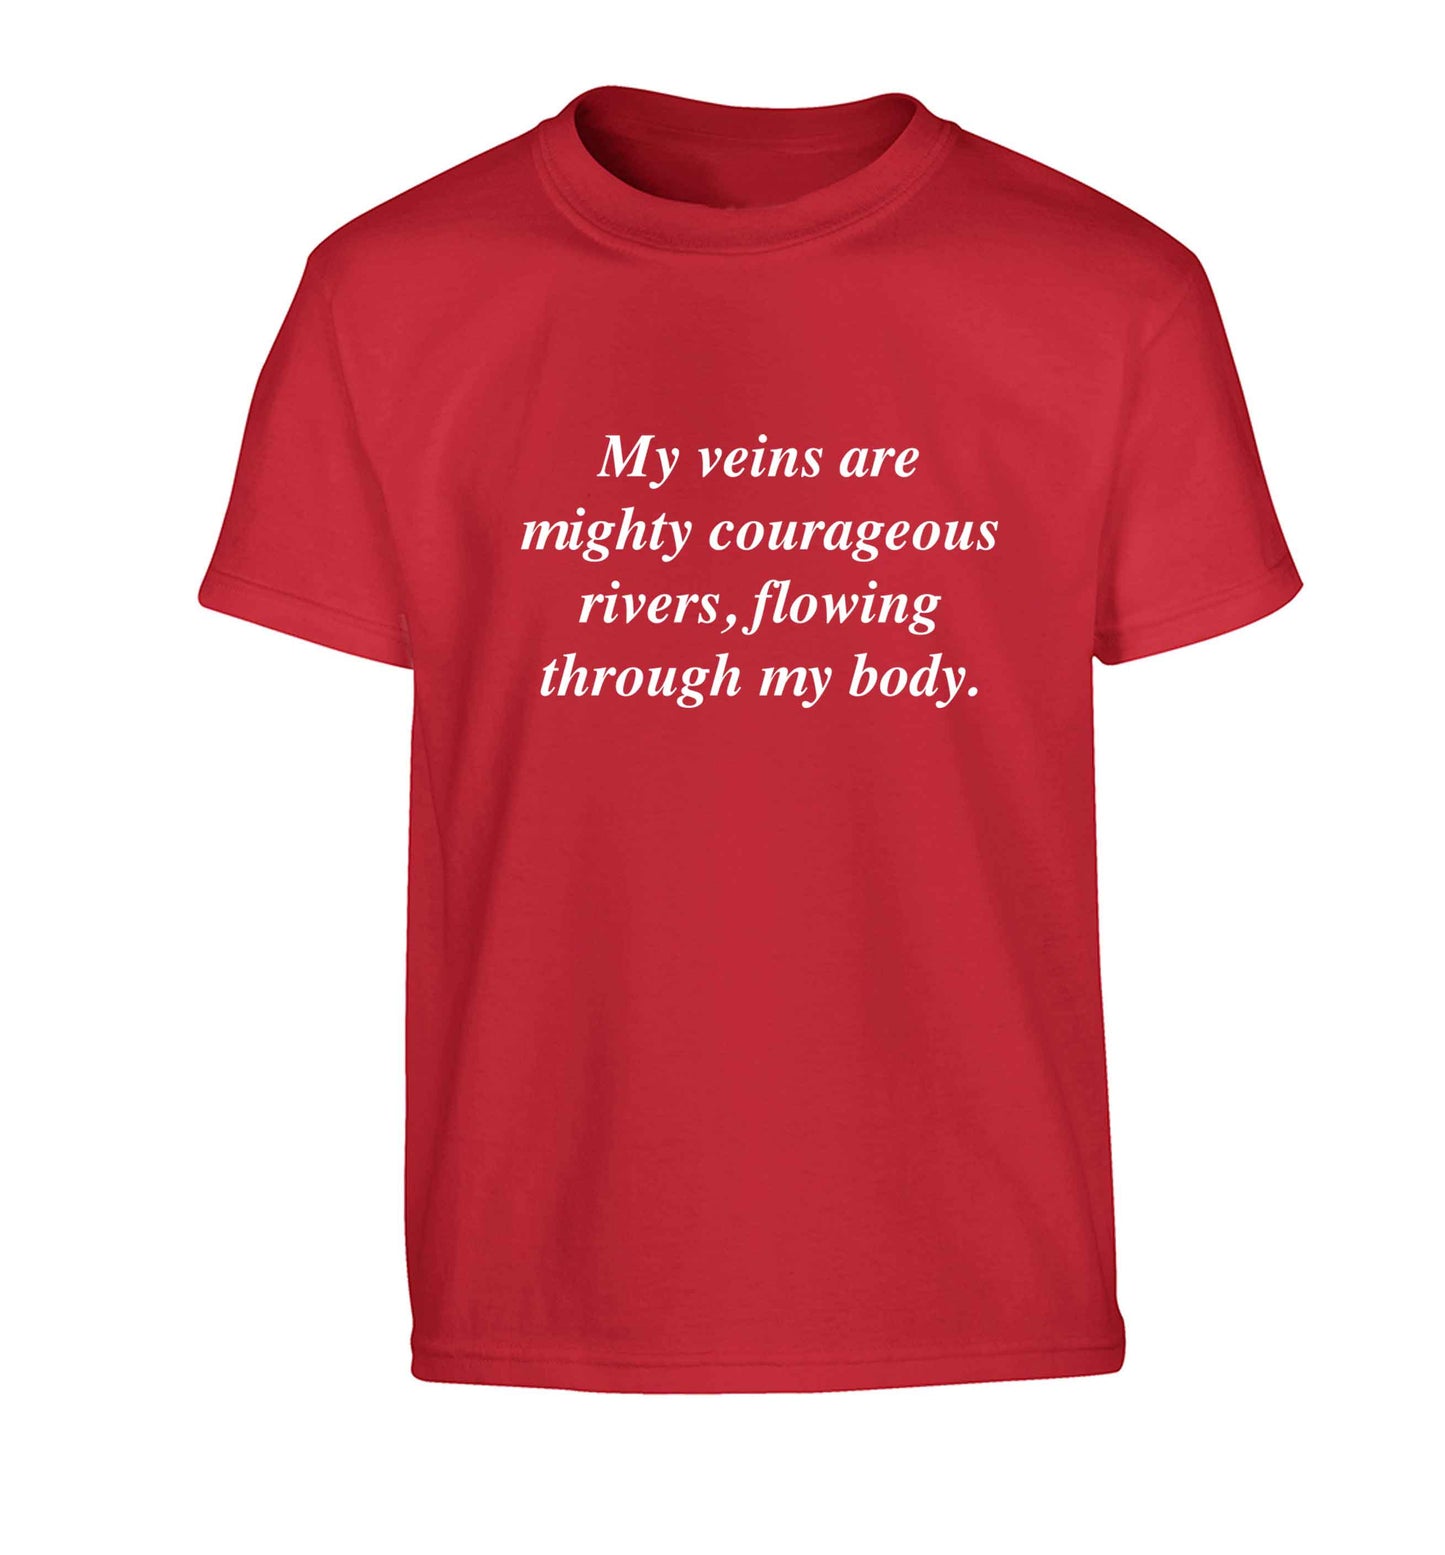 My veins are mighty courageous rivers, flowing through my body Children's red Tshirt 12-13 Years